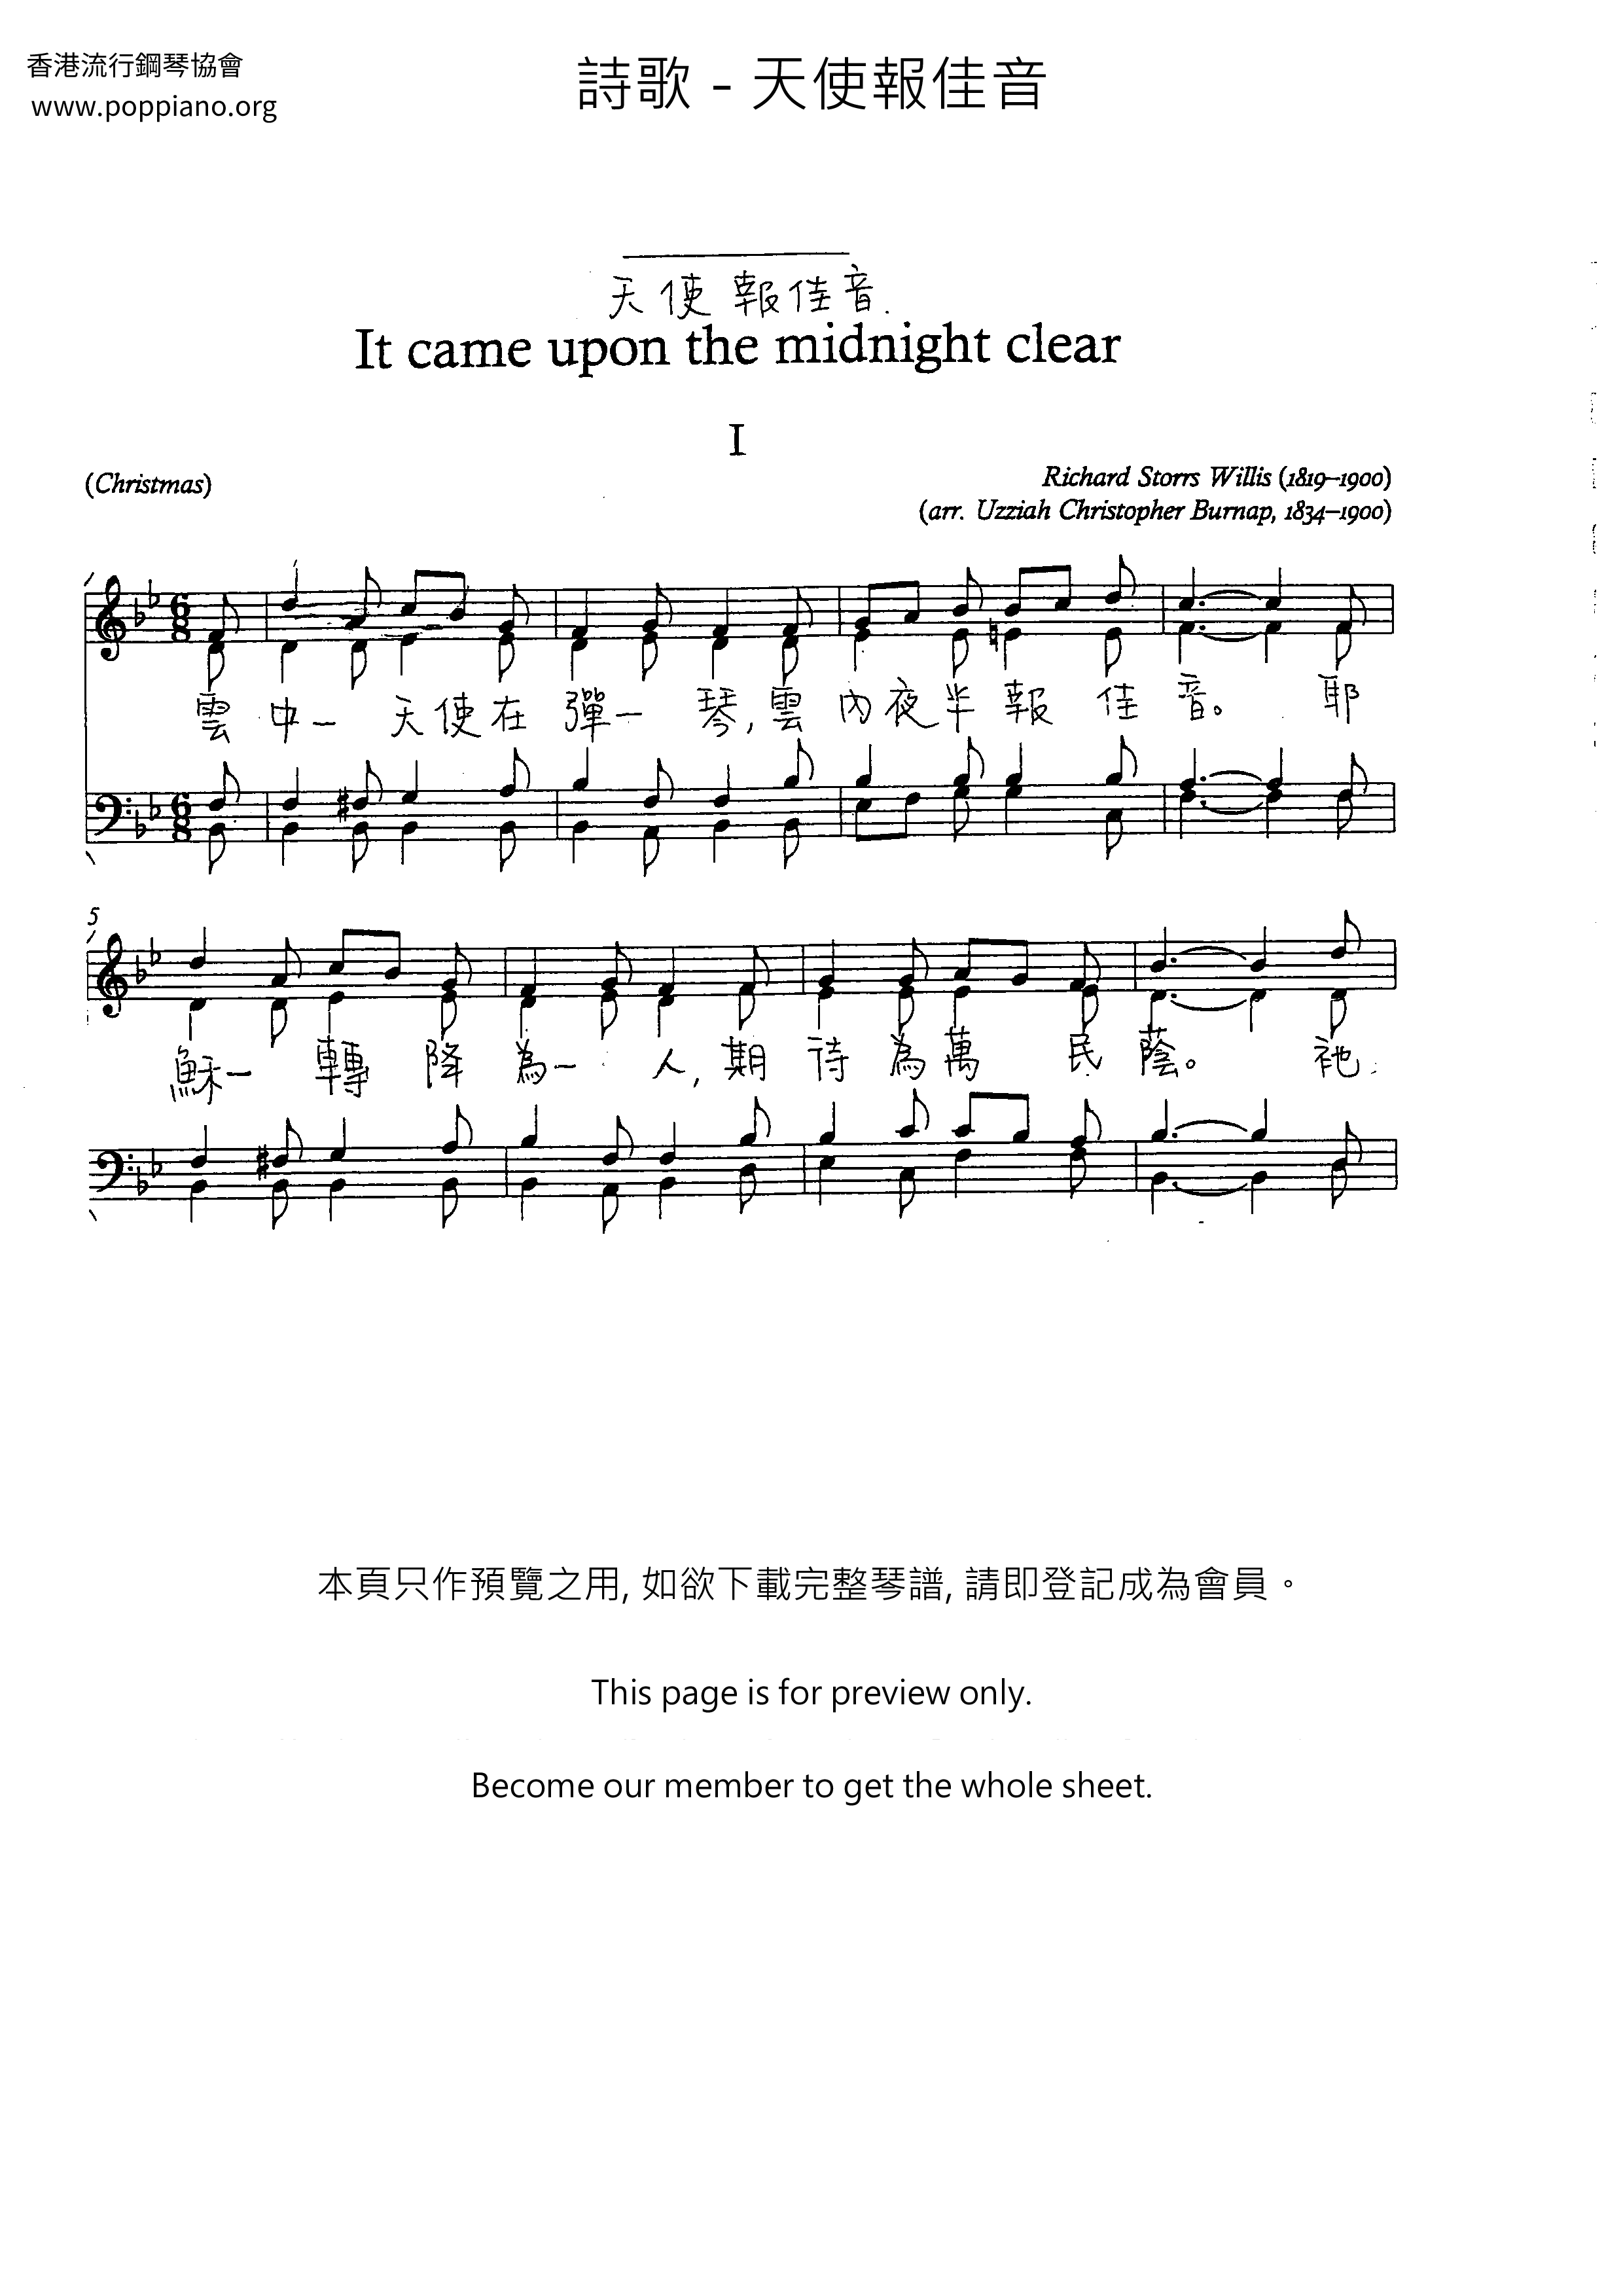 Hymn It Came Upon The Midnight Clear Sheet Music Pdf Free Score Download